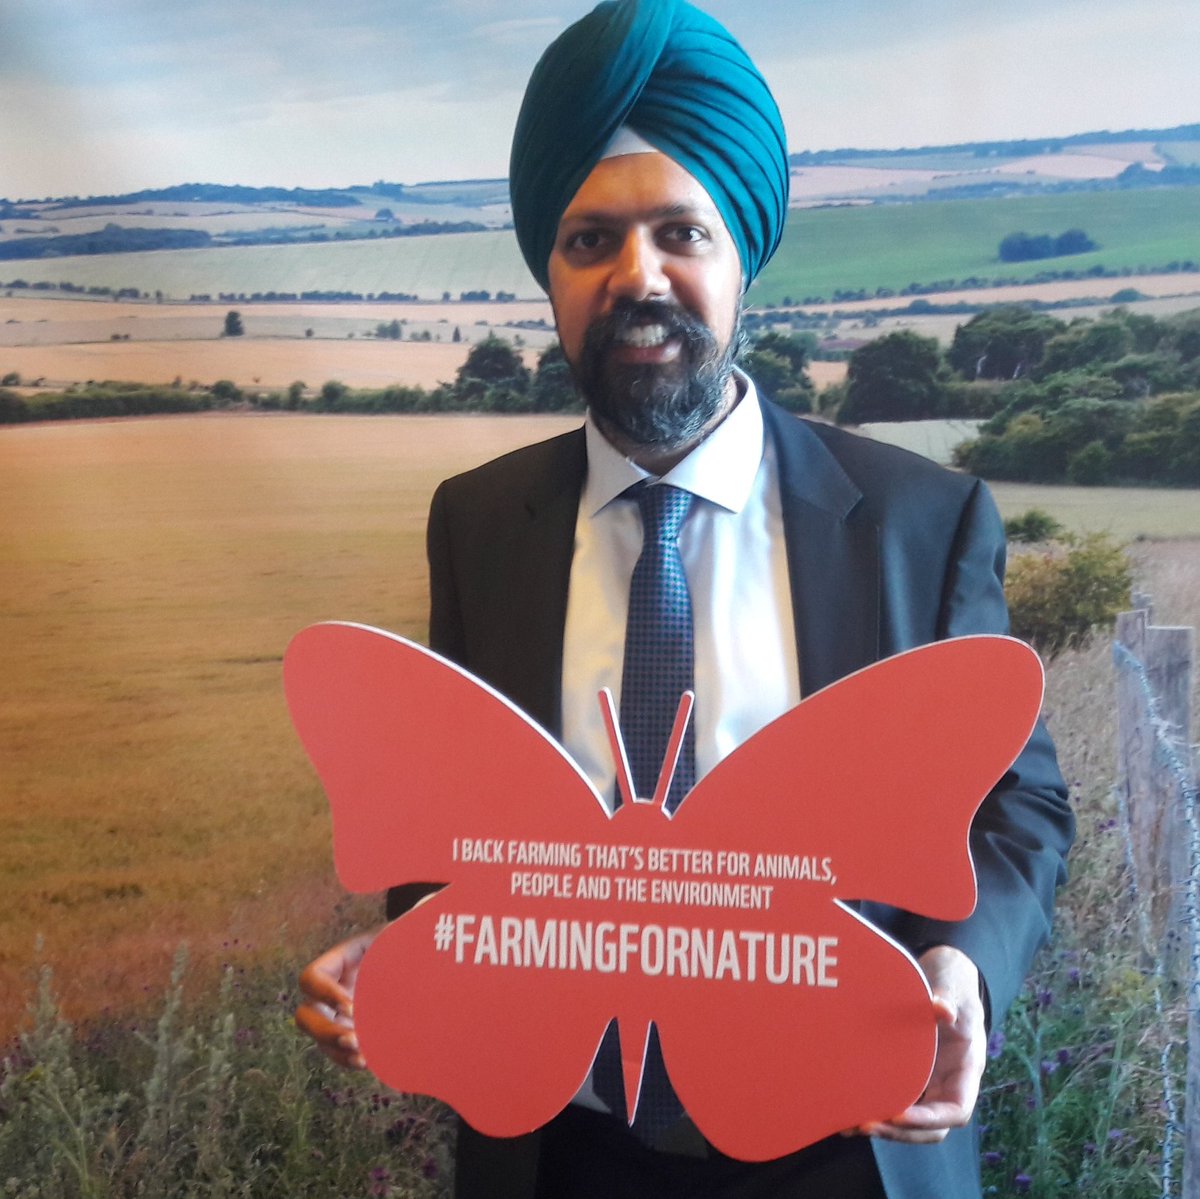 Really great to meet @TanDhesi today to talk about the importance of nature friendly farming. Thanks for stopping by! #farmingfornature